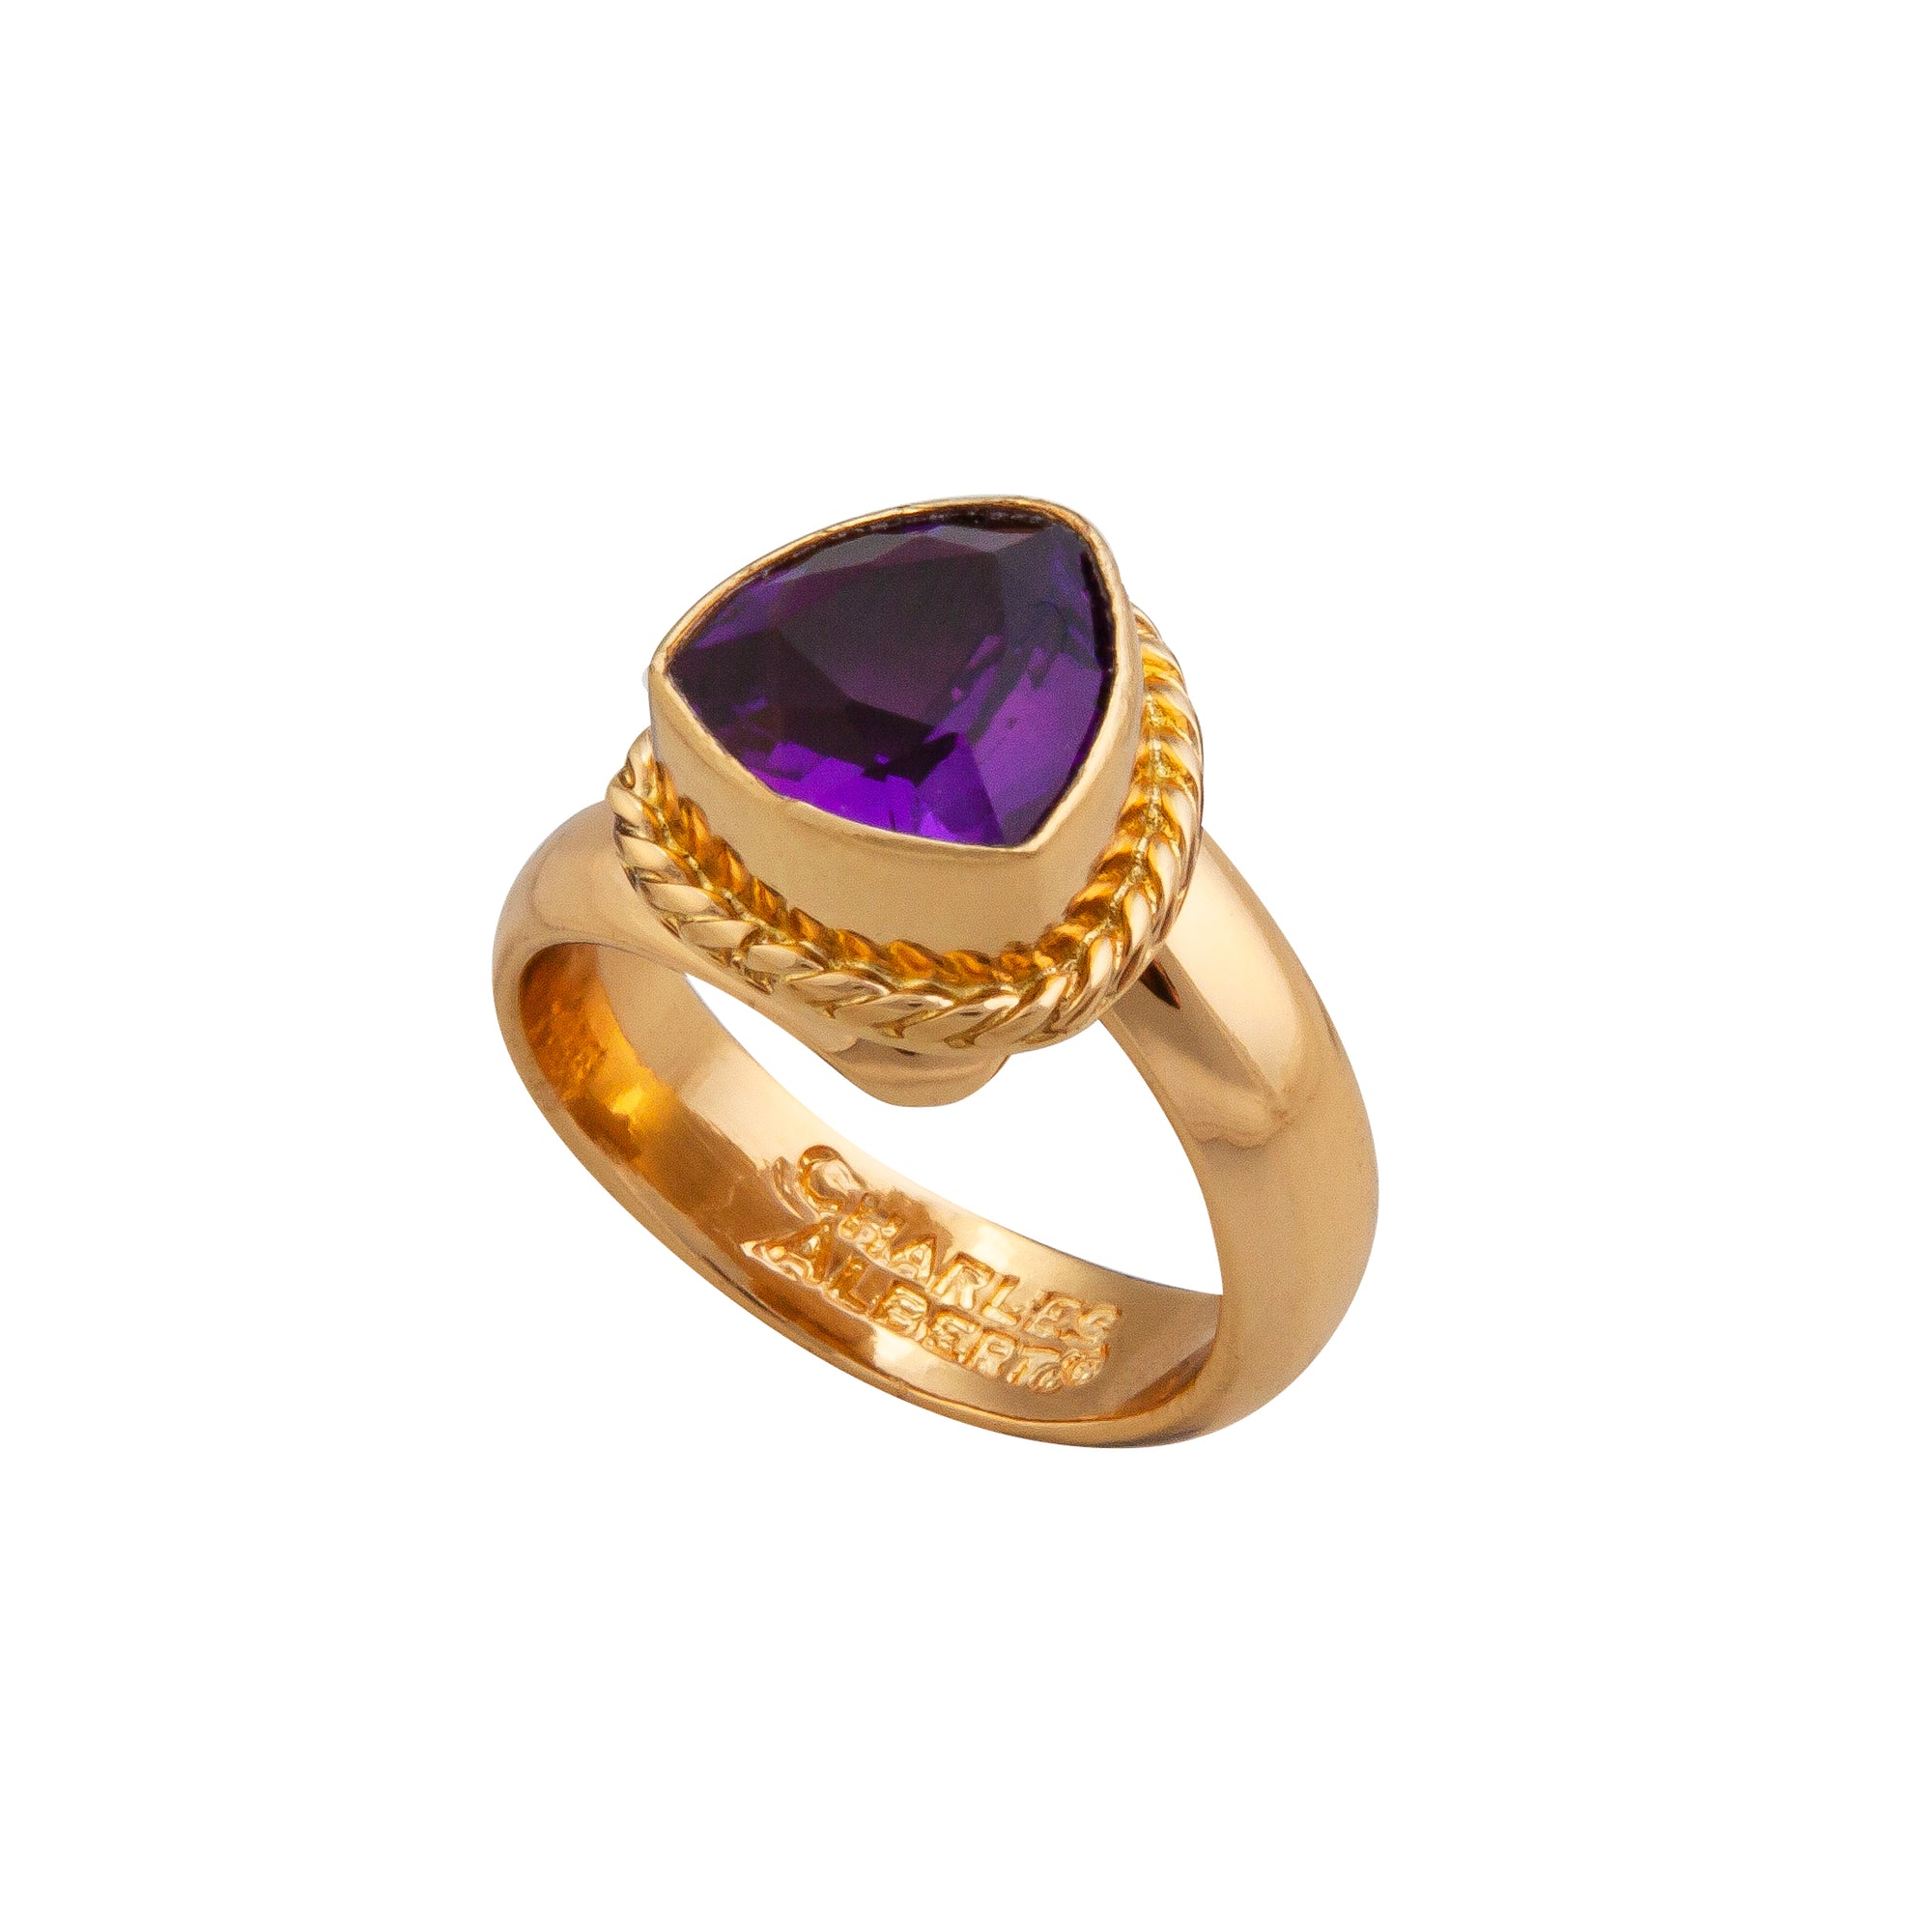 Charles Albert Jewelry - Alchemia Amethyst Trillion Rope Adjustable Ring - Front View